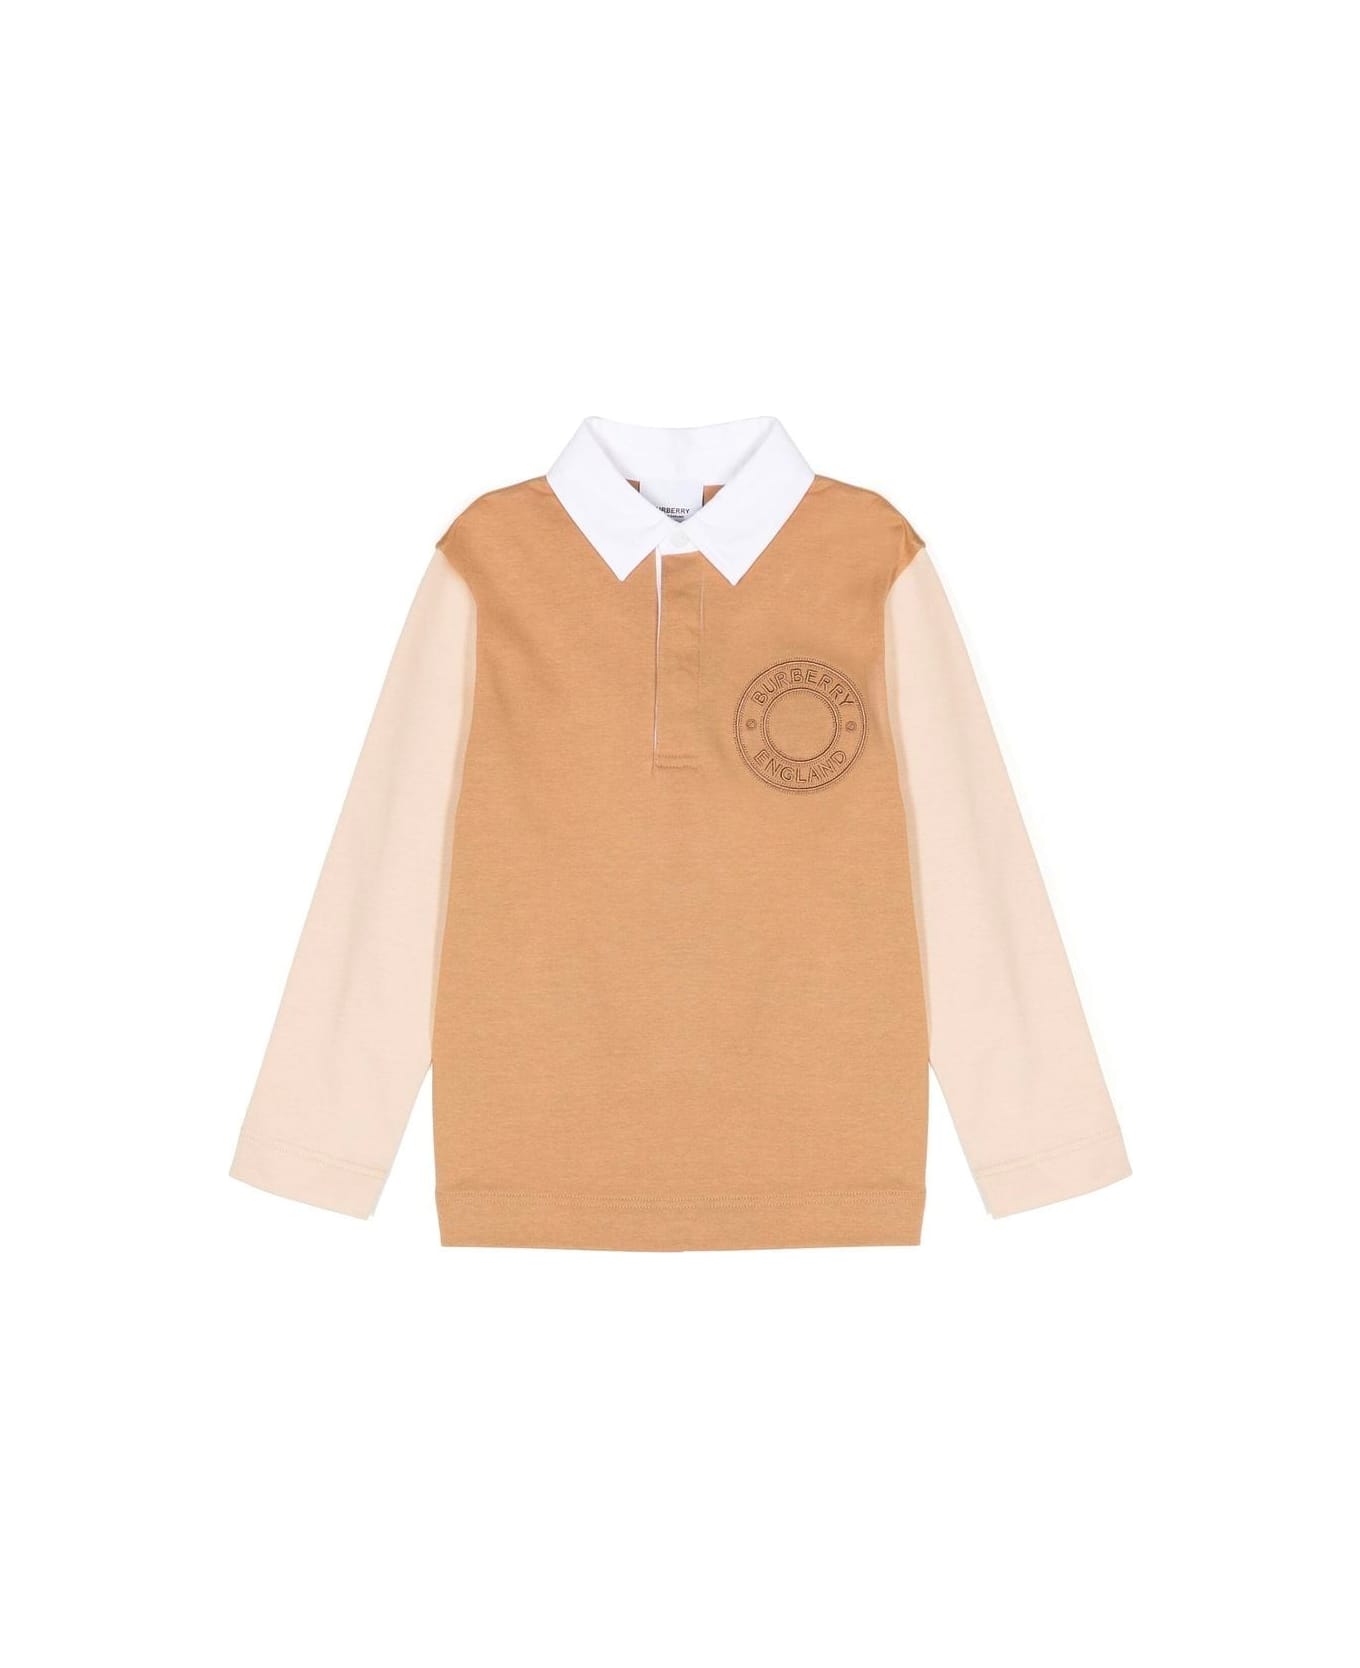 Burberry Roundel Polo - Archive Beige Tシャツ＆ポロシャツ